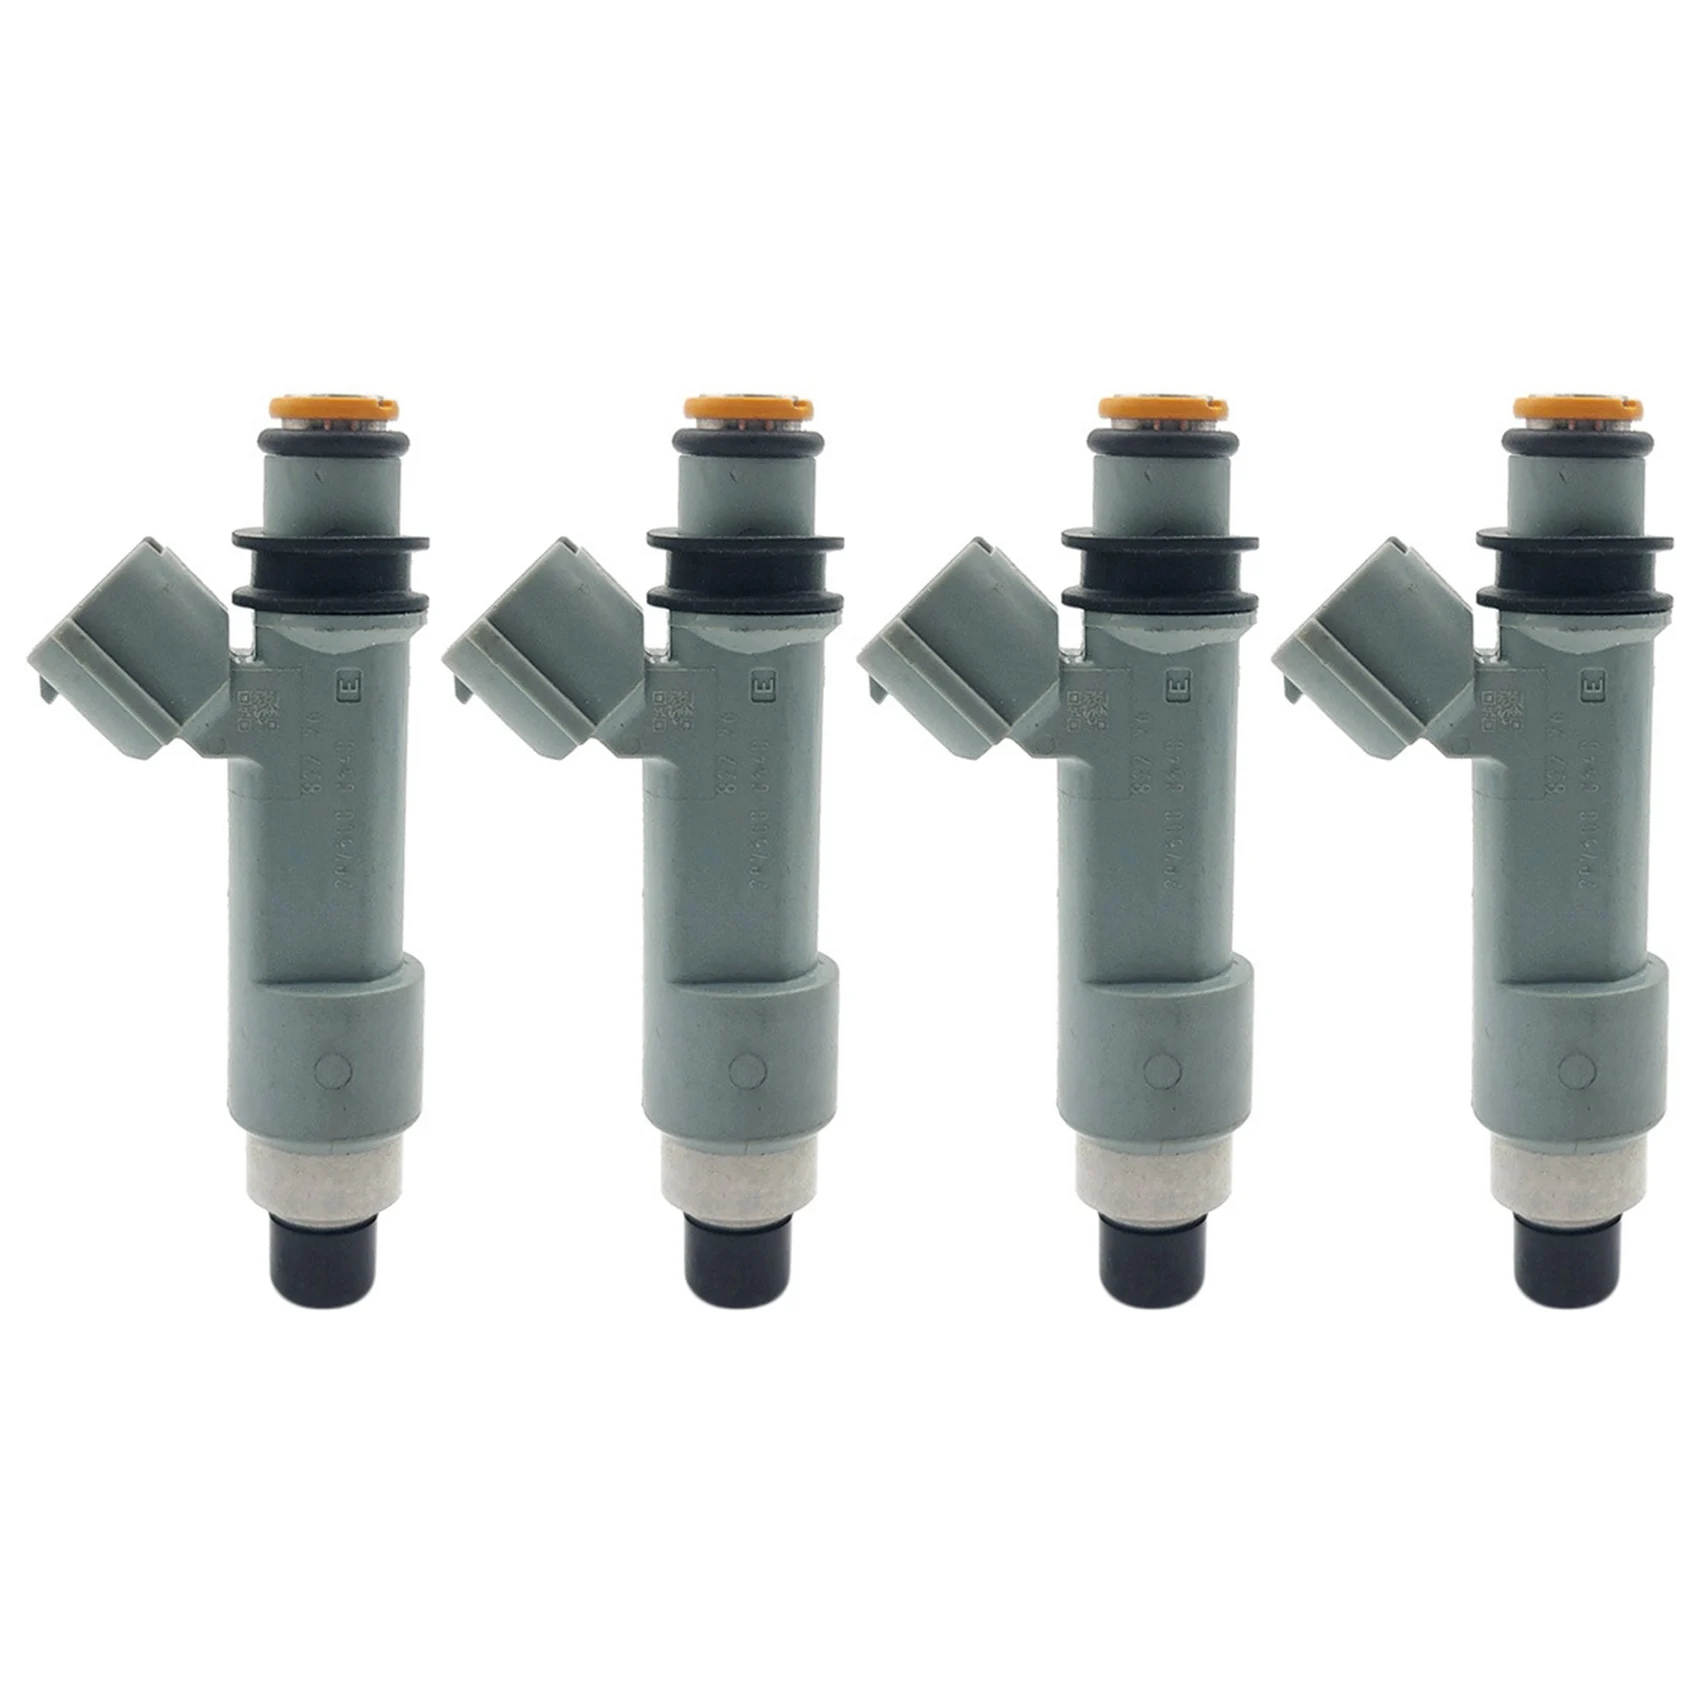 

4X Car Nozzle Fuel Injector Bico 29750 00540 for SUZUKI SX4 1.3 1.6 2014-2015 2975000540 Injection Assy-Fuel Parts